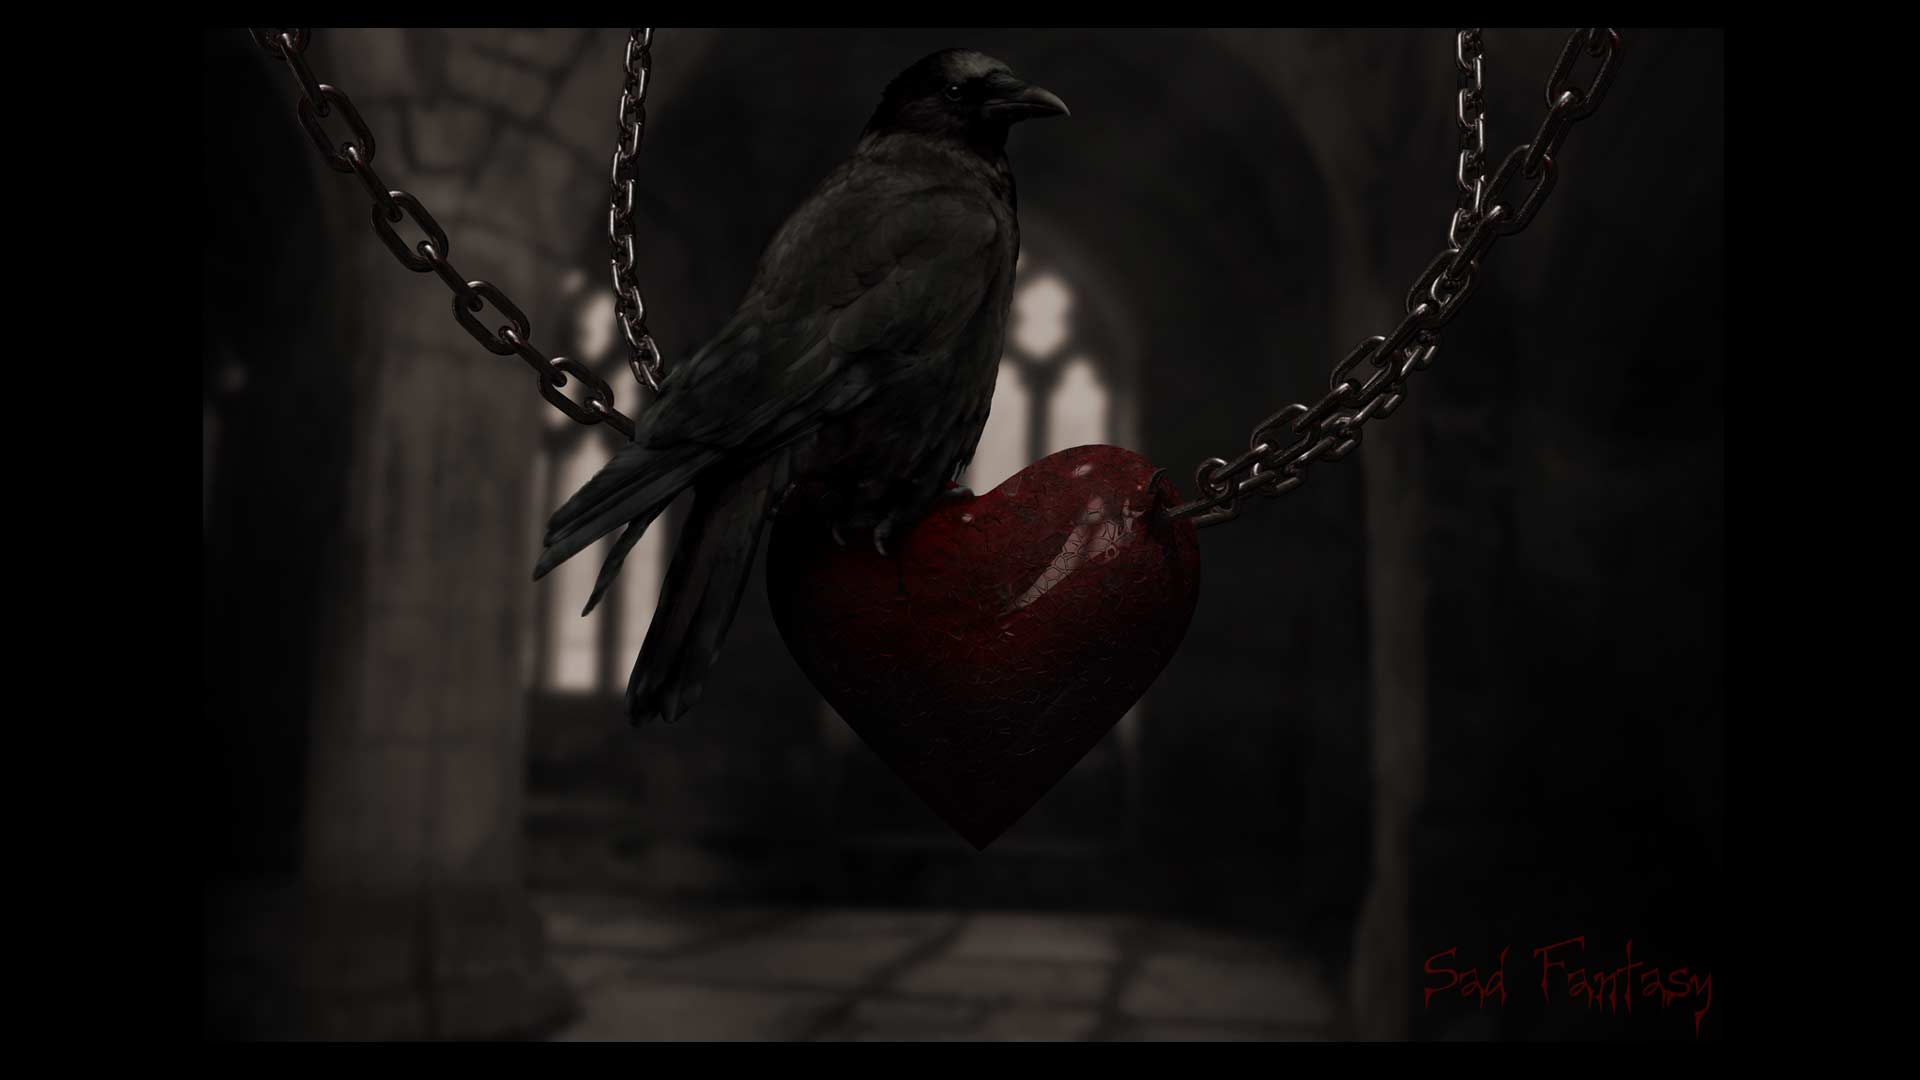 heart in chains witha crow/raven, broken heart series by Sad Fantasy